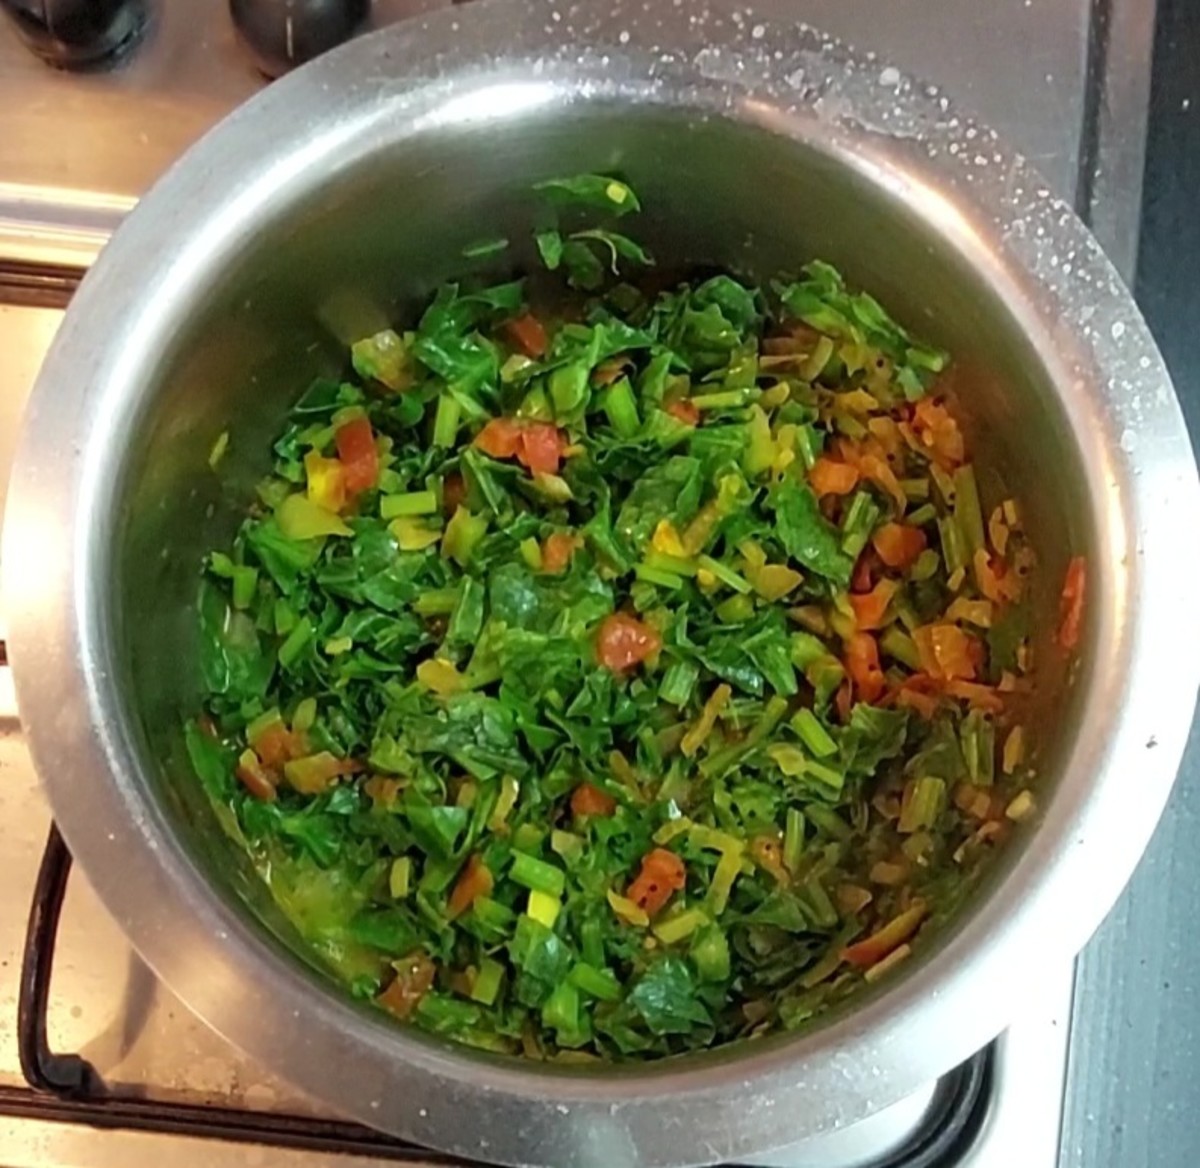 Mix and saute till palak shrinks (about 5 minutes over medium flame).